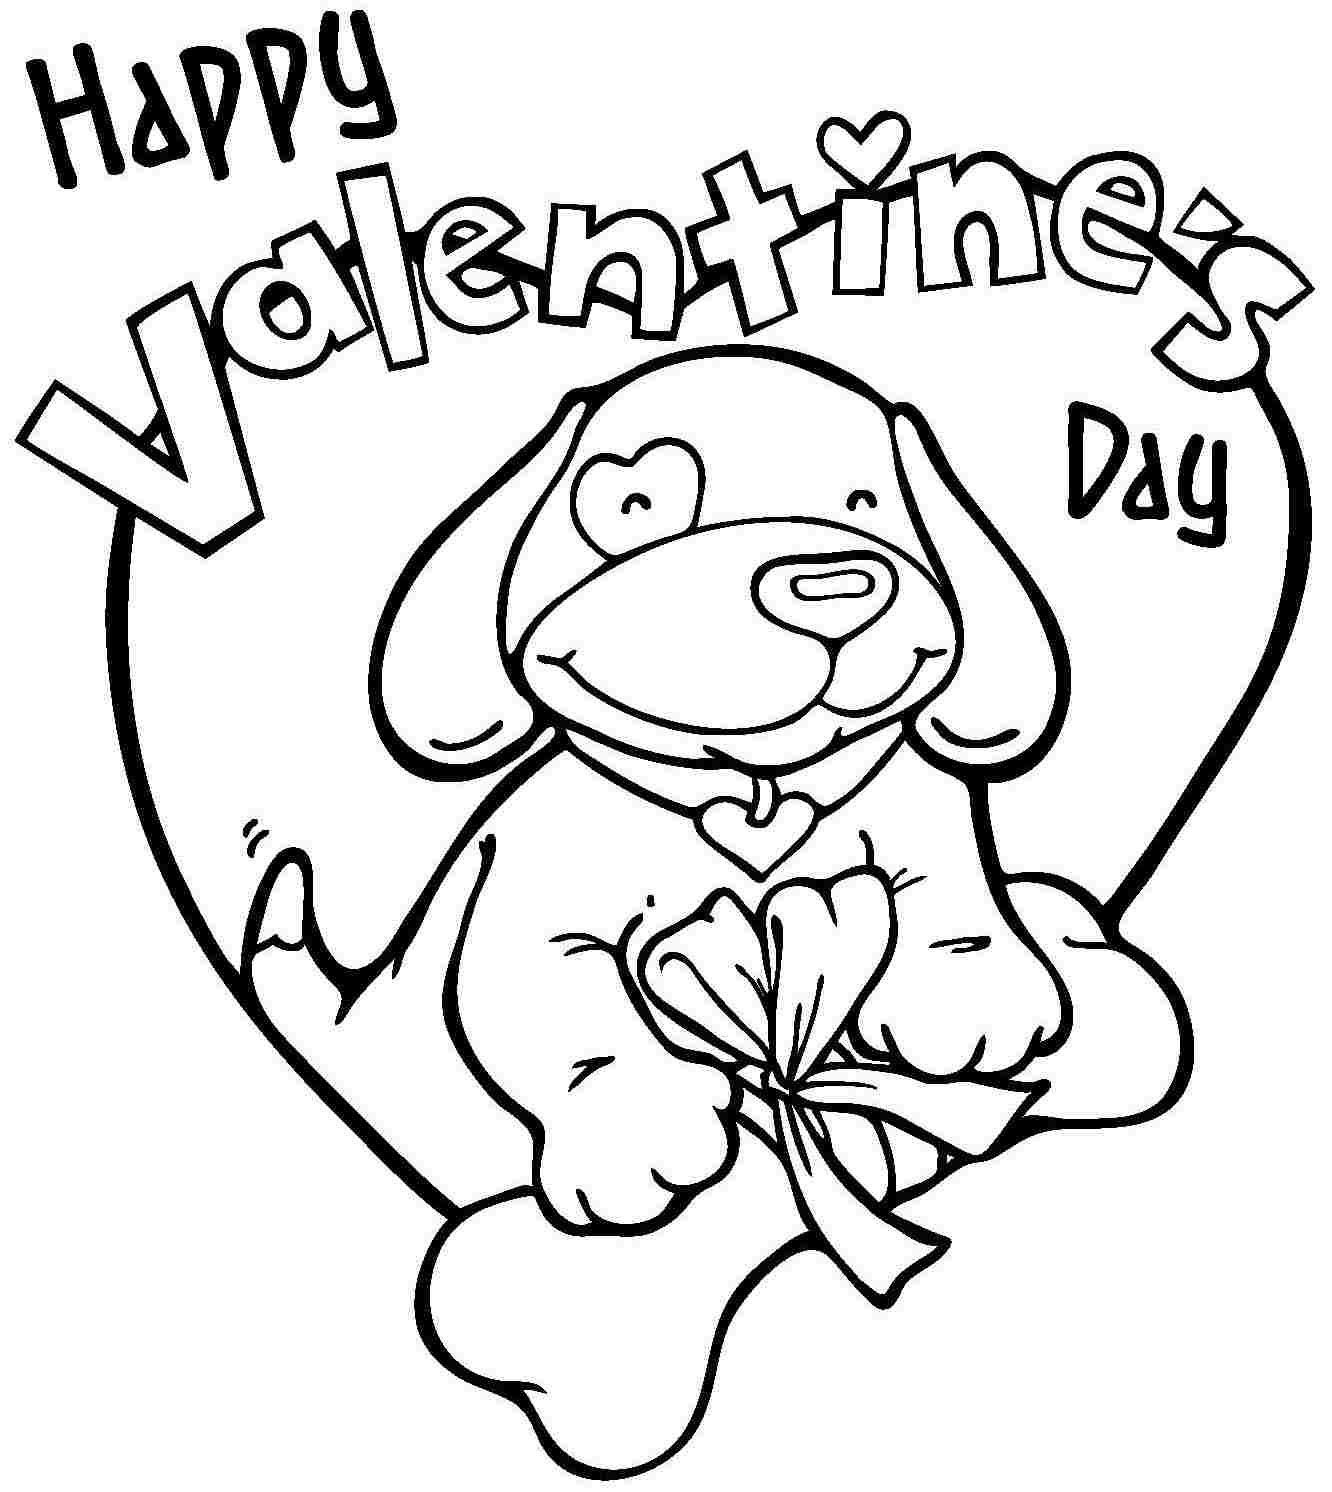 valentine-coloring-pages-for-prek-coloring-home